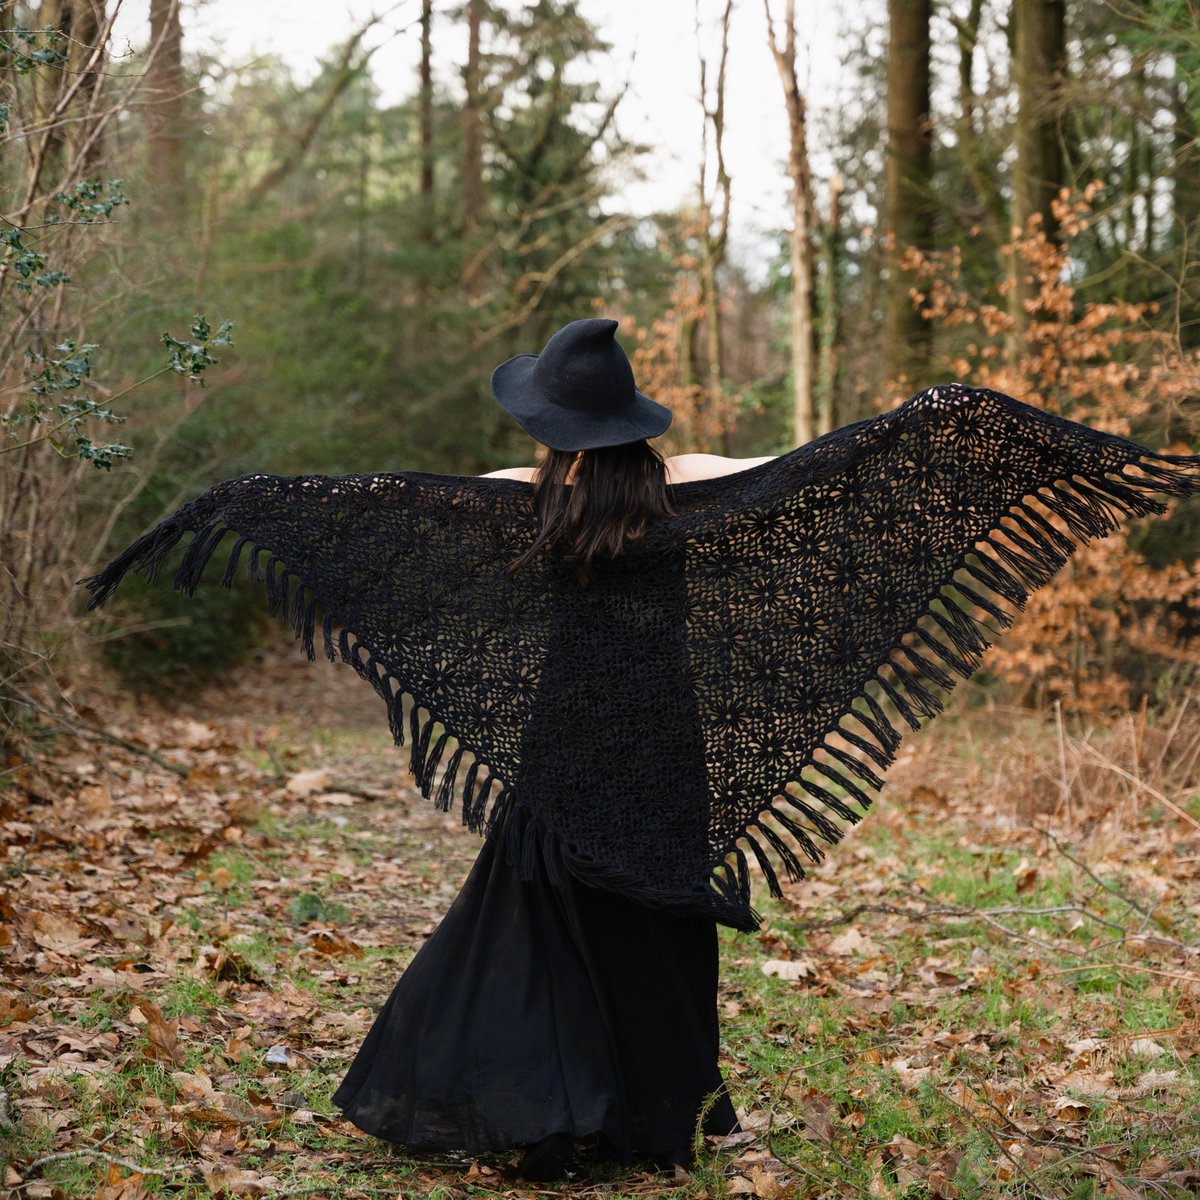 Fly wild and free 🖤✨🖤 'Night of the Dark Moon' shawl: etsy.com/uk/listing/103… 🧙‍♀️✴️💫 #hecate #hekate #darkmoon #darkmoonmagick #witch #ravenspirit #witchcore #gothic #gothicwitch #darkcottagecore #darkmagick #solitarywitch #supporthandmade